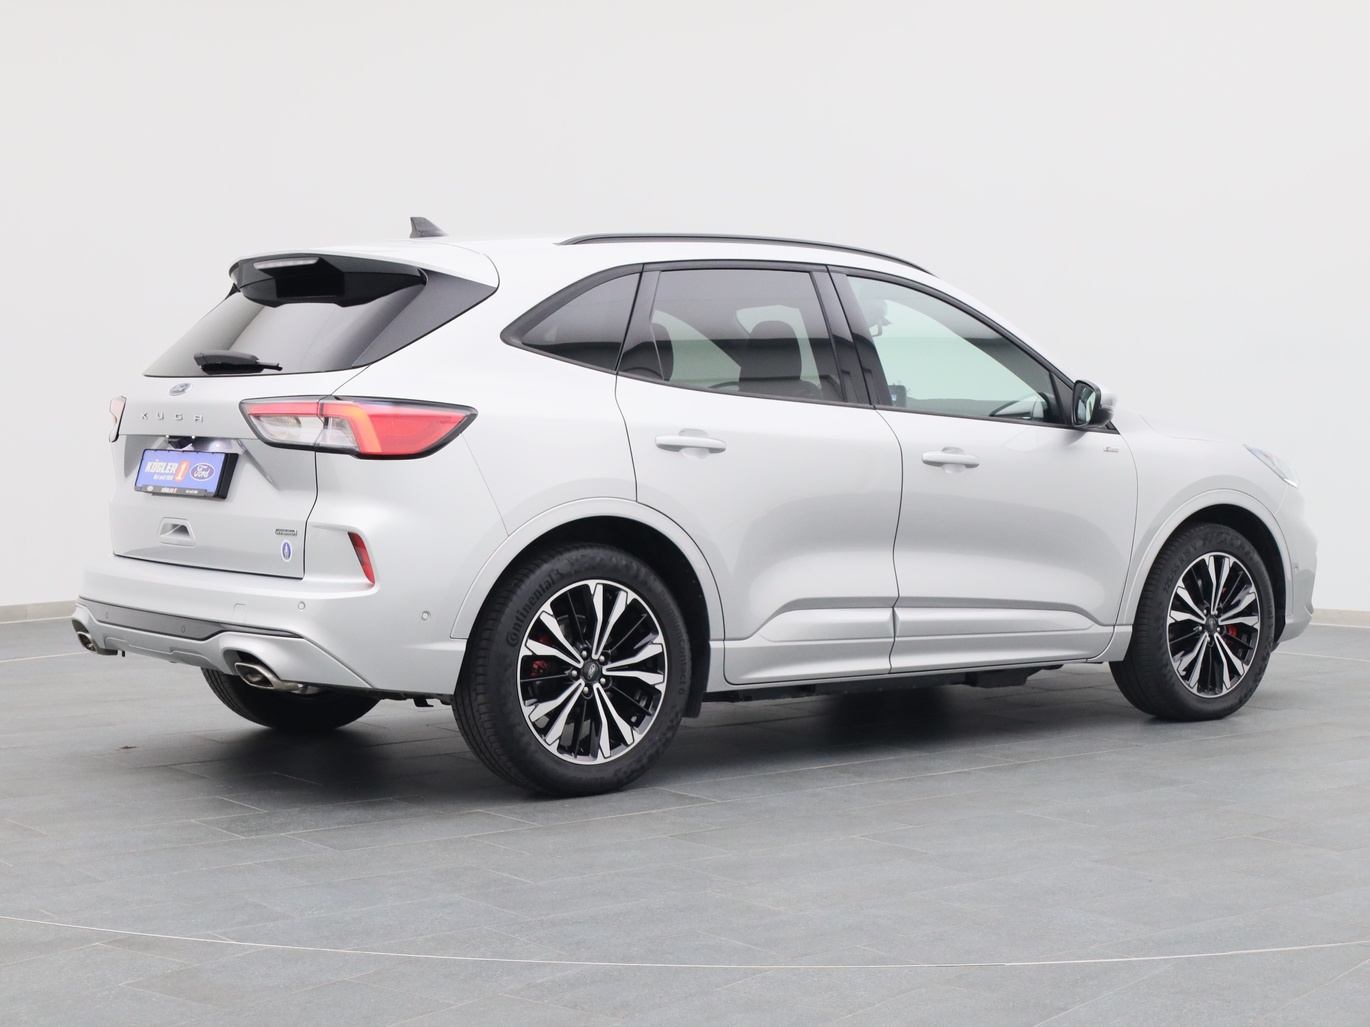  Ford Kuga ST-Line X 225PS Plug-in-Hybrid Aut. in Polar Silber 